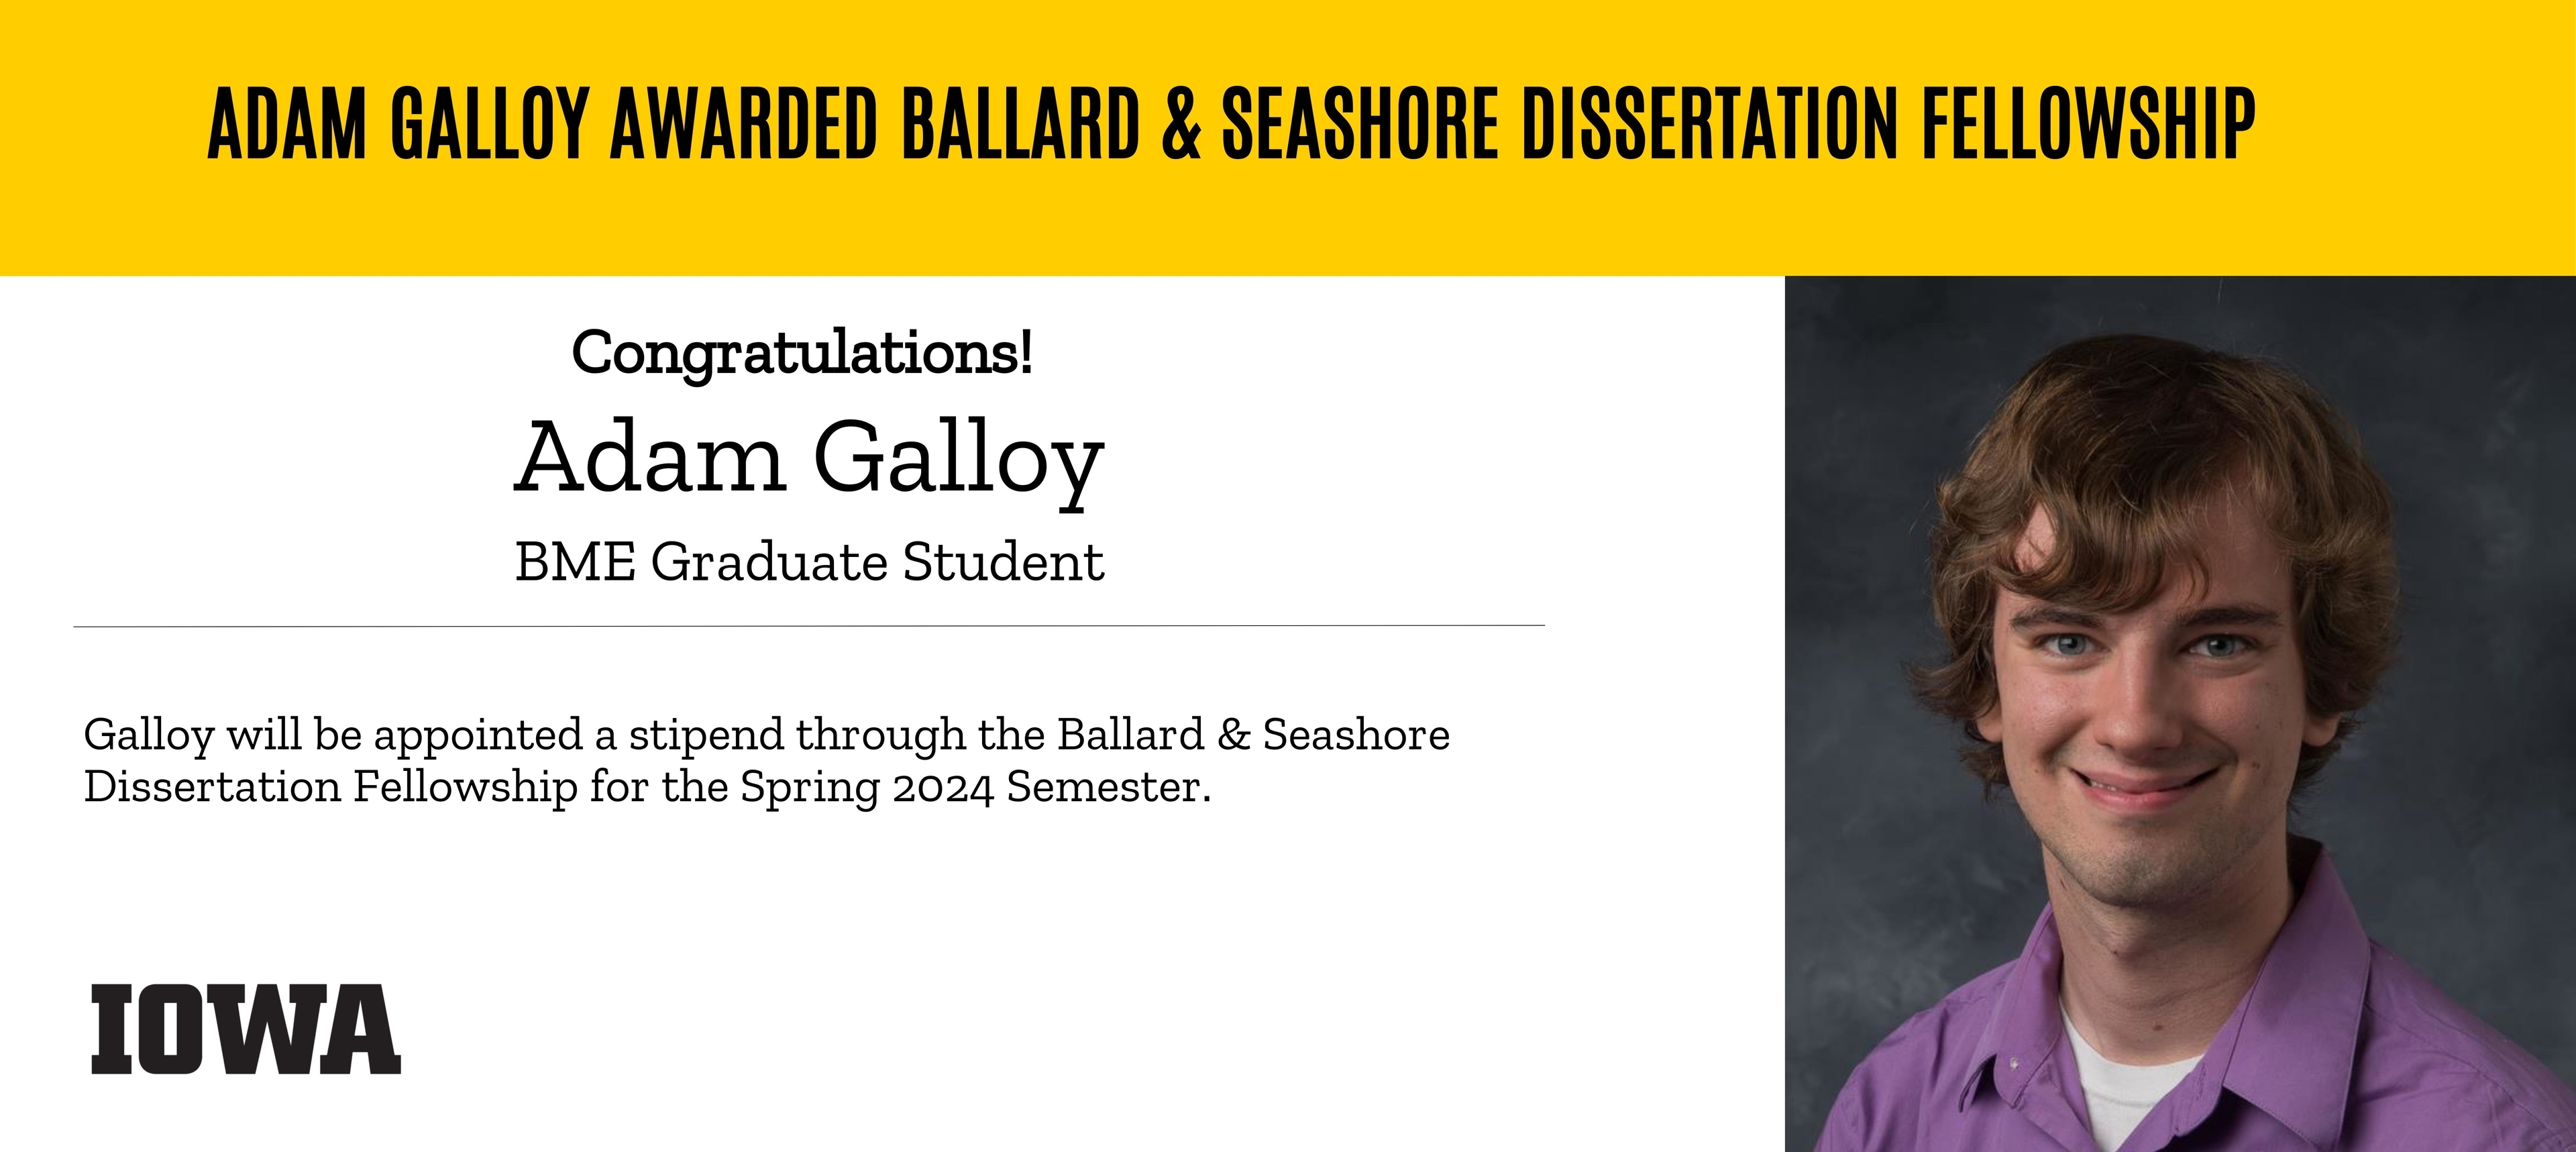 Picture of Adam Galloy, who is awarded Ballard & Seashore Dissertation Fellowship for 2024